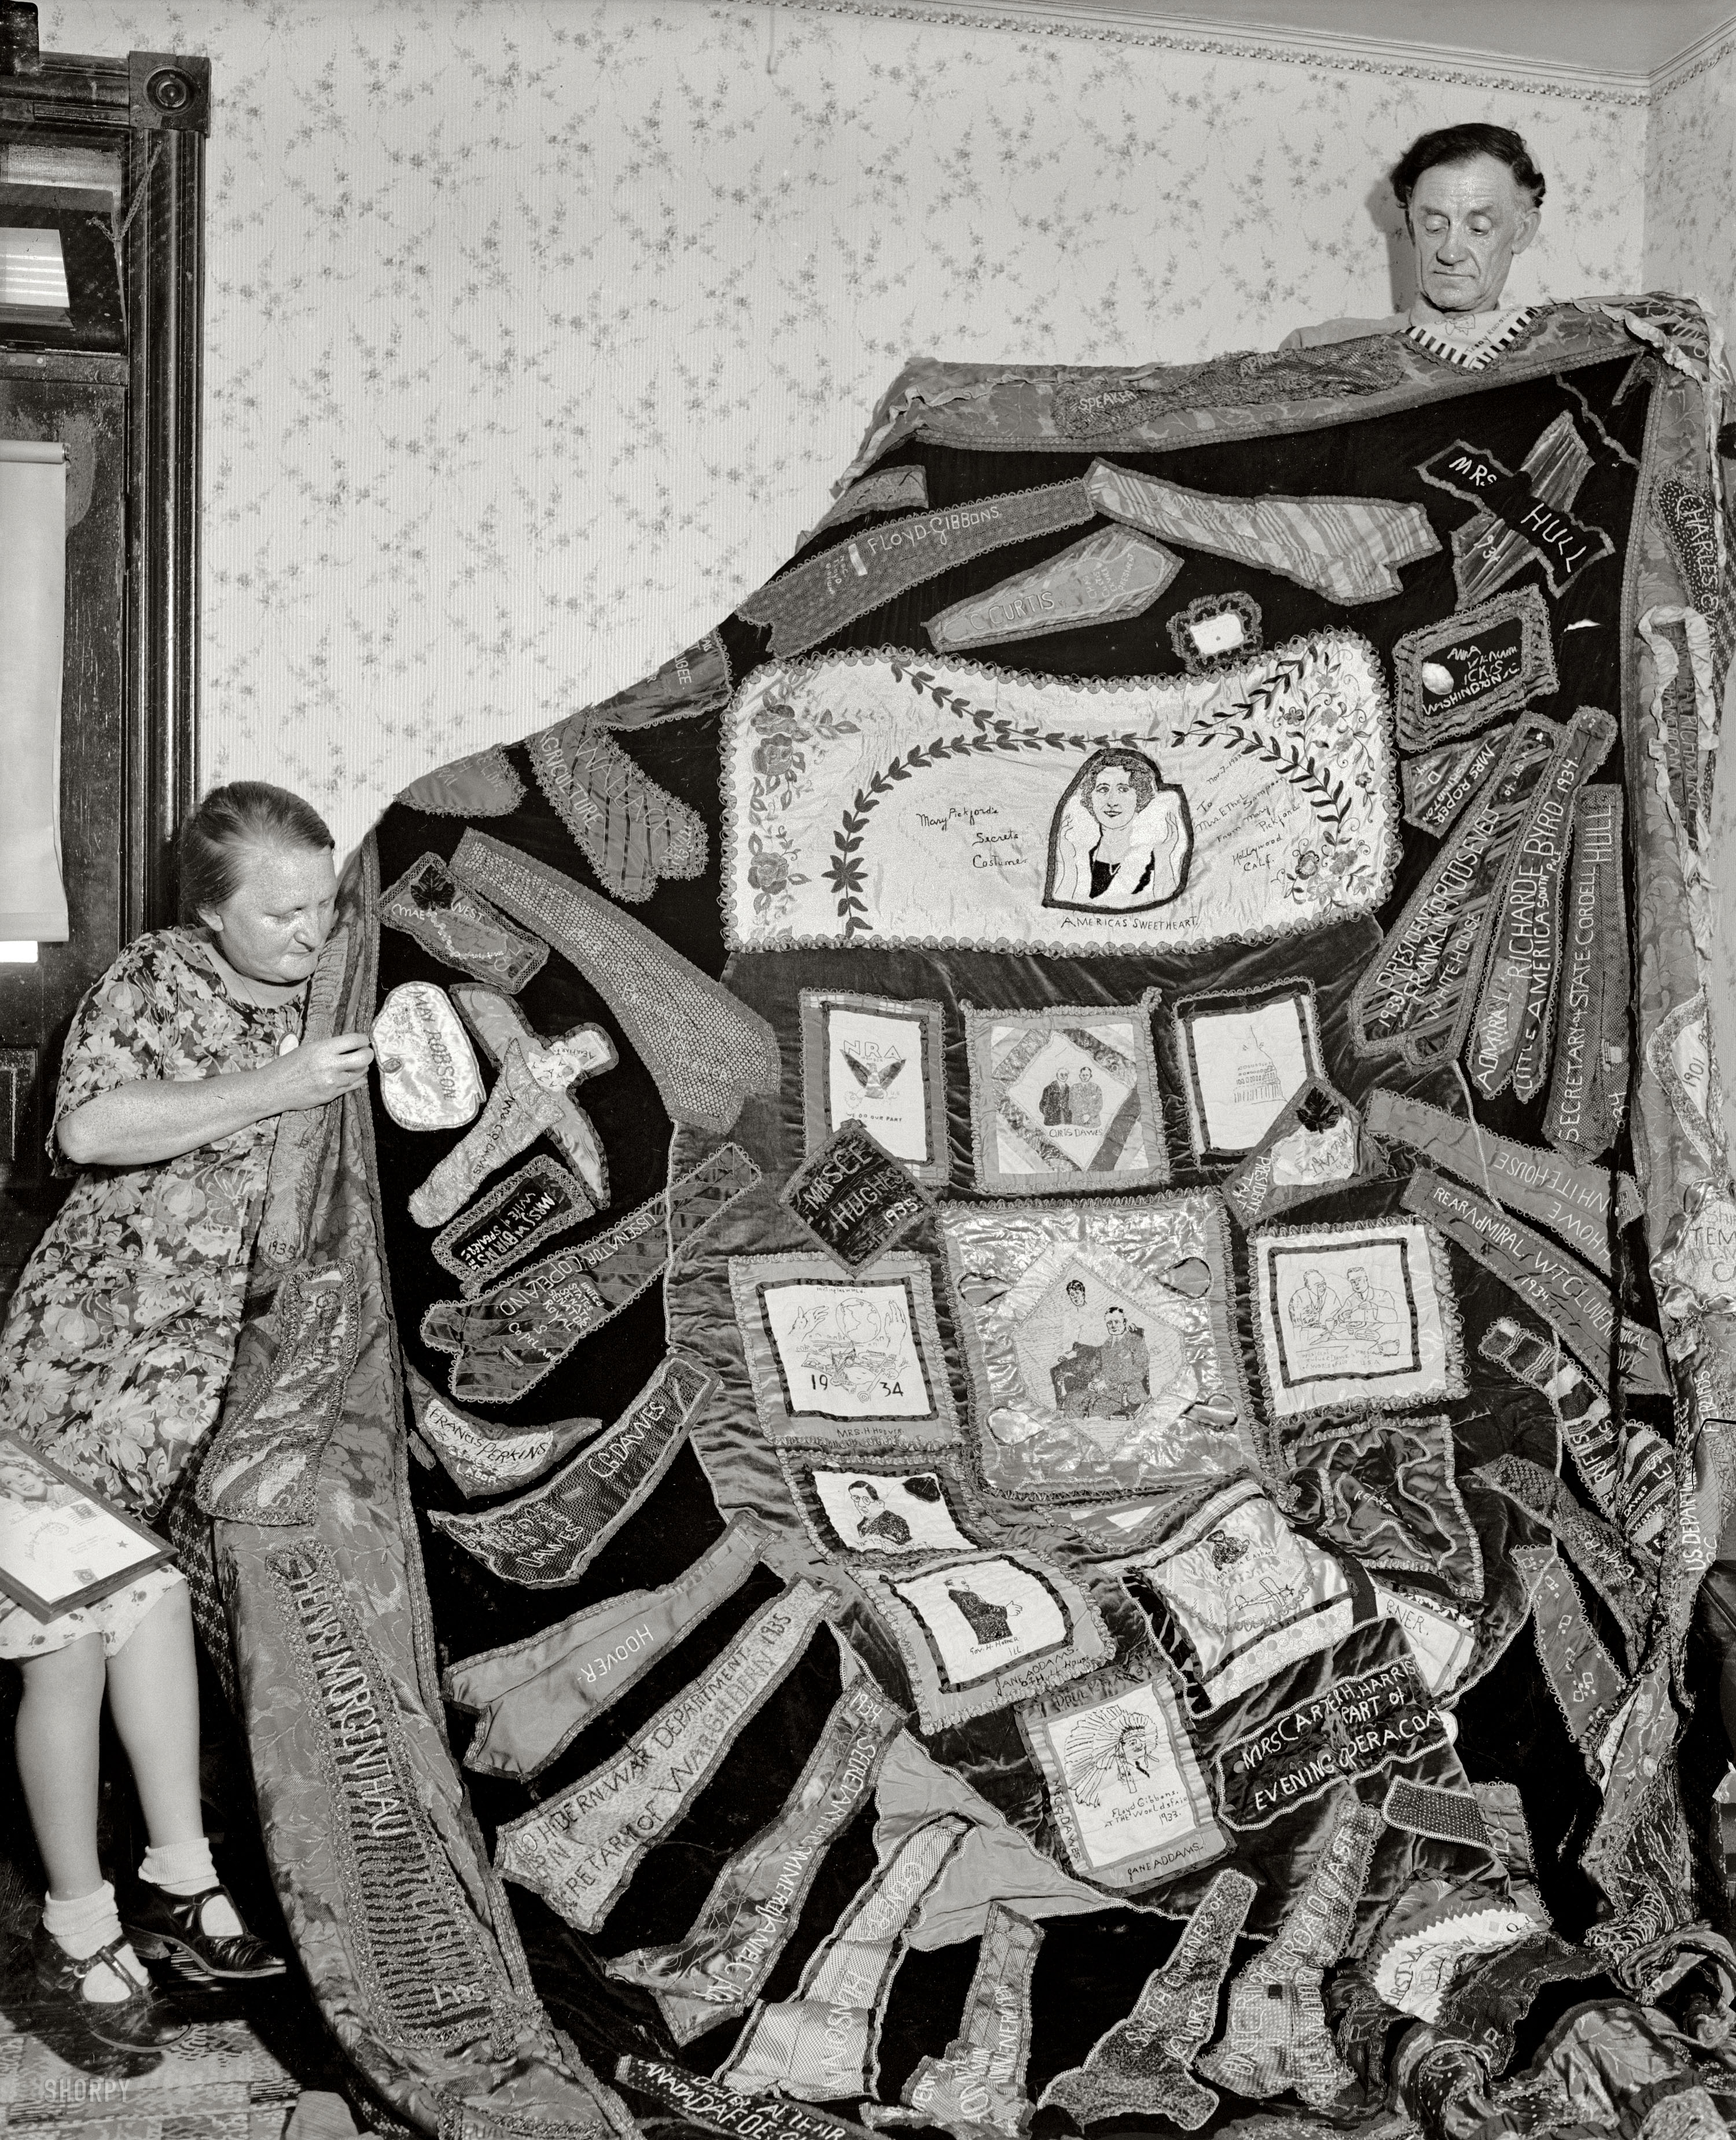 August 17, 1937. "Joseph's coat of many colors had nothing on this unique quilt which is now being completed by Mrs. Ethel Sampson of Evanston, Ill., after six years of collecting. Parts of wearing apparel from President Roosevelt, Mrs. Roosevelt, members of the Cabinet, diplomats and notables from all over. From Hollywood, Bing Crosby sent a tie while Mae West and Shirley Temple contributed parts of dresses. Former Emperor Haile Selassie's neckties and a linen of Windsor are also included on the quilt. Diapers from the Dionne Quintuplets are also prominently displayed." Harris & Ewing glass negative. View full size.